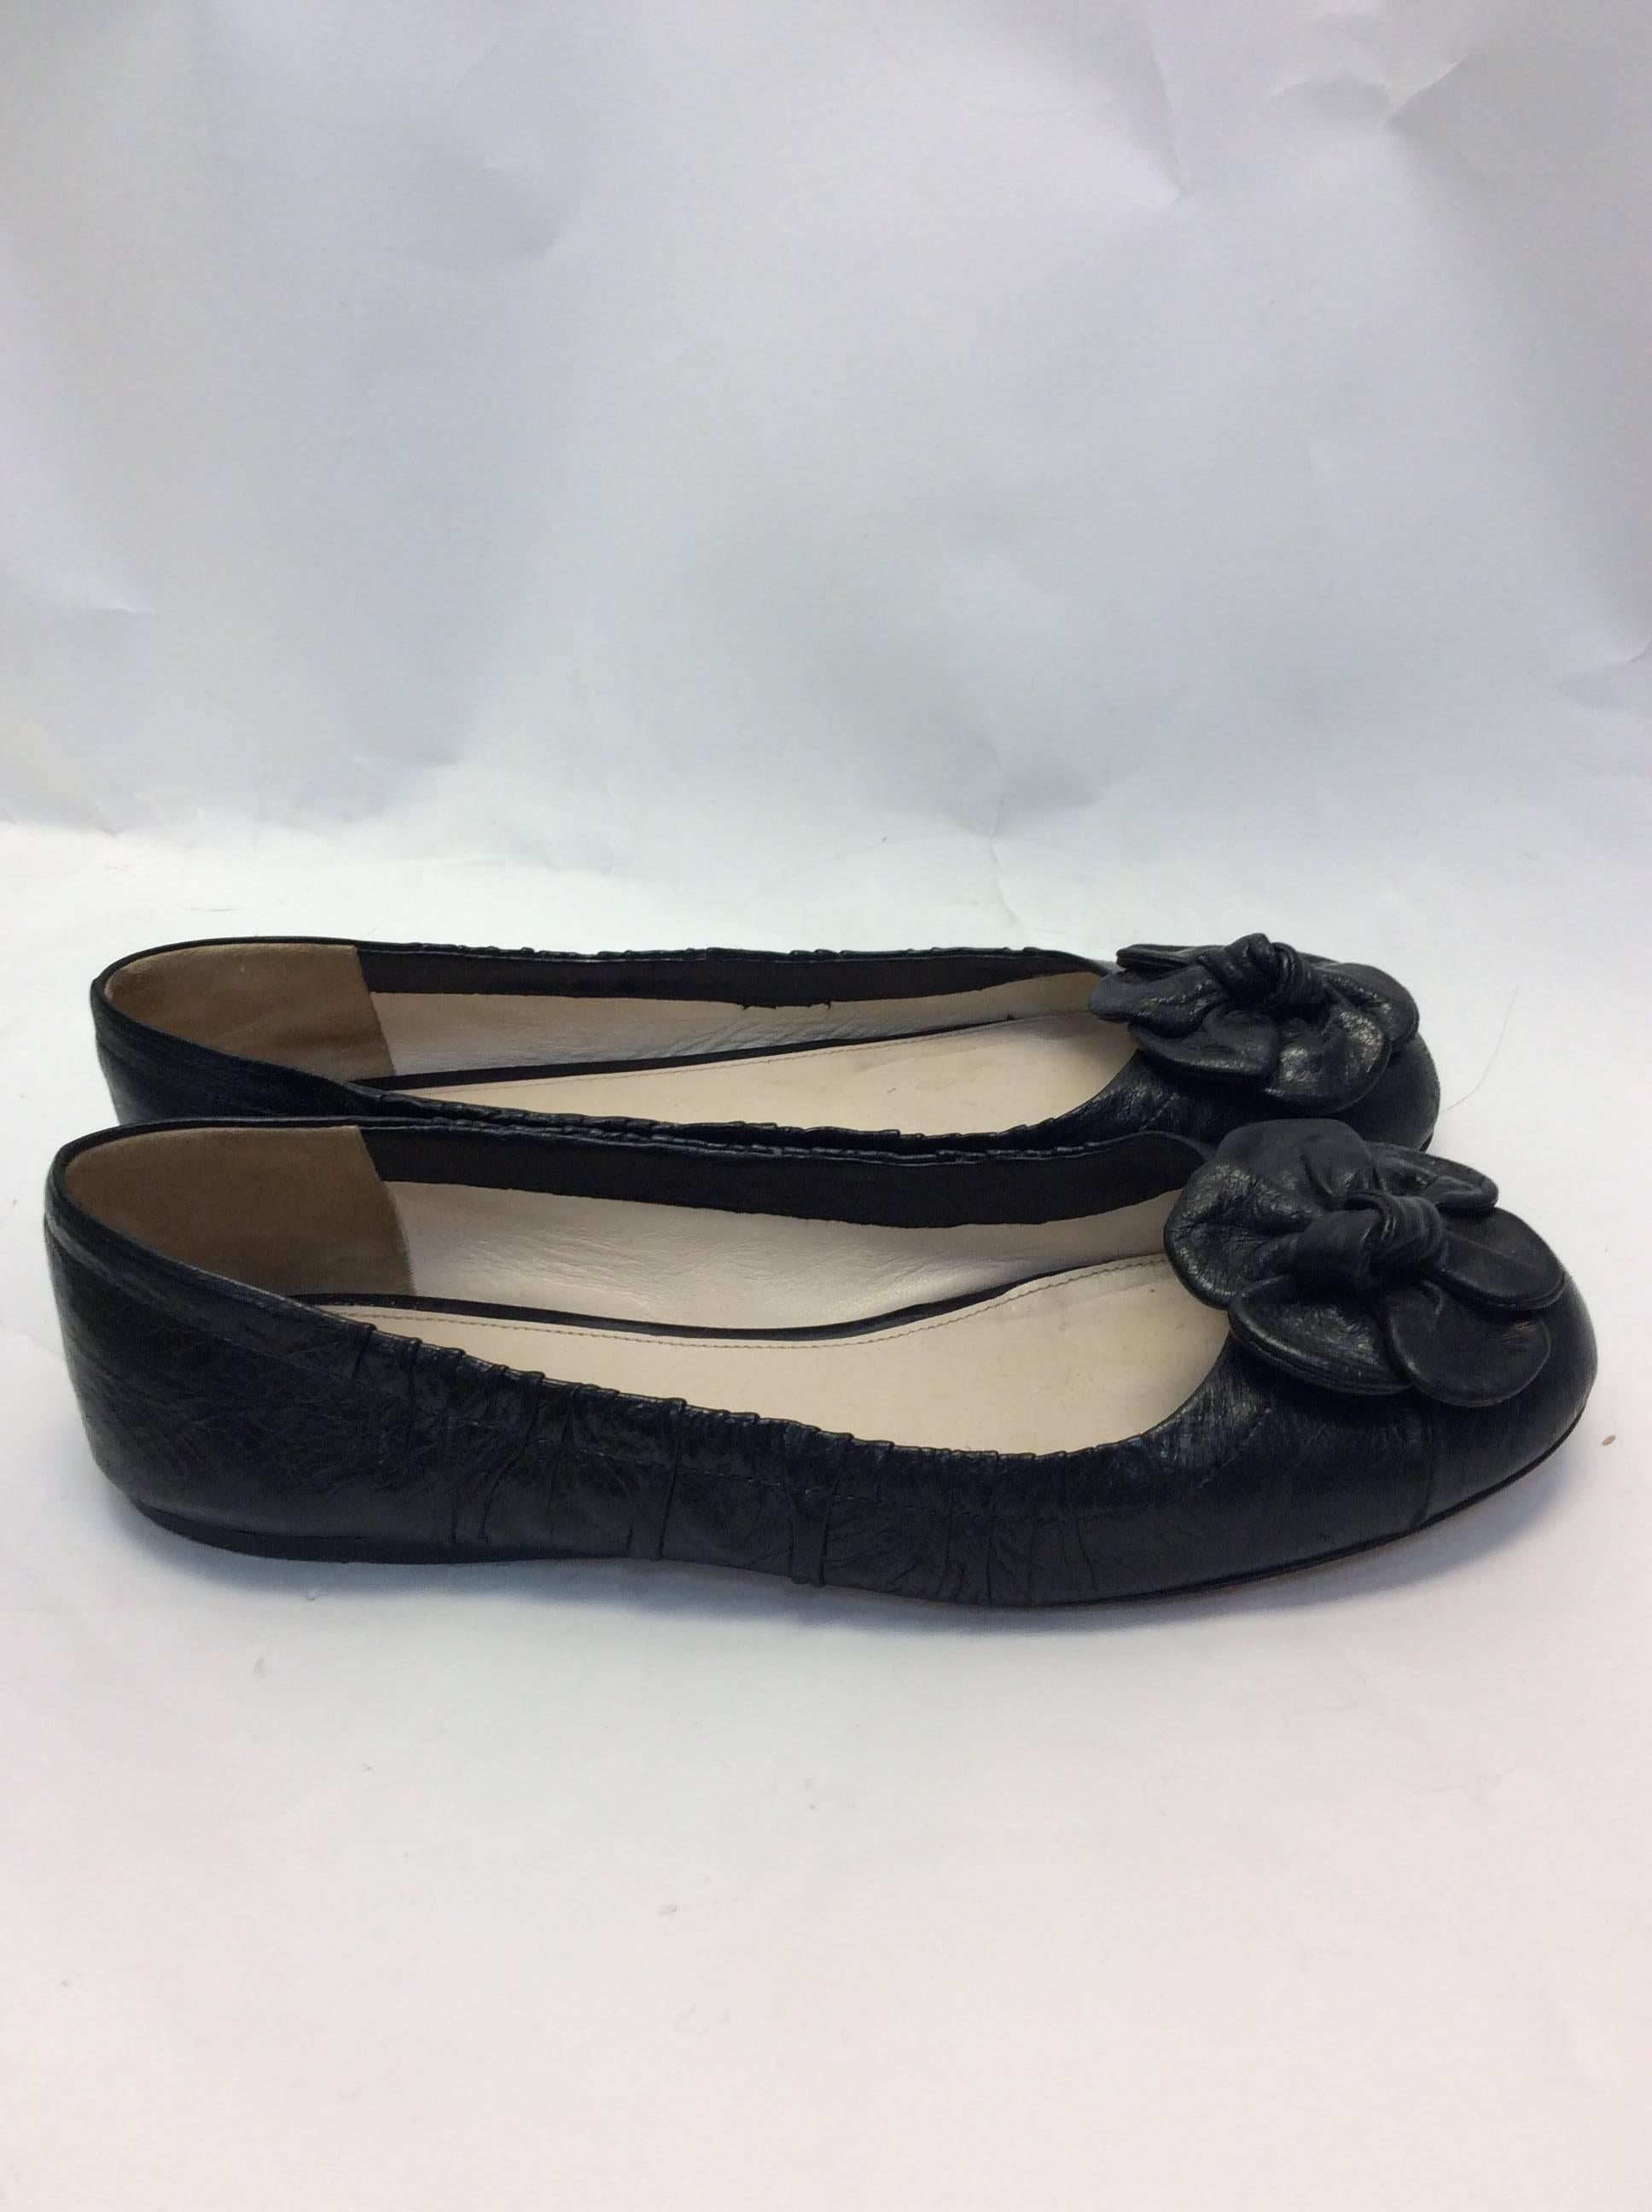 Prada Black Leather Flats
Size 38.5
Made in Italy
$150
